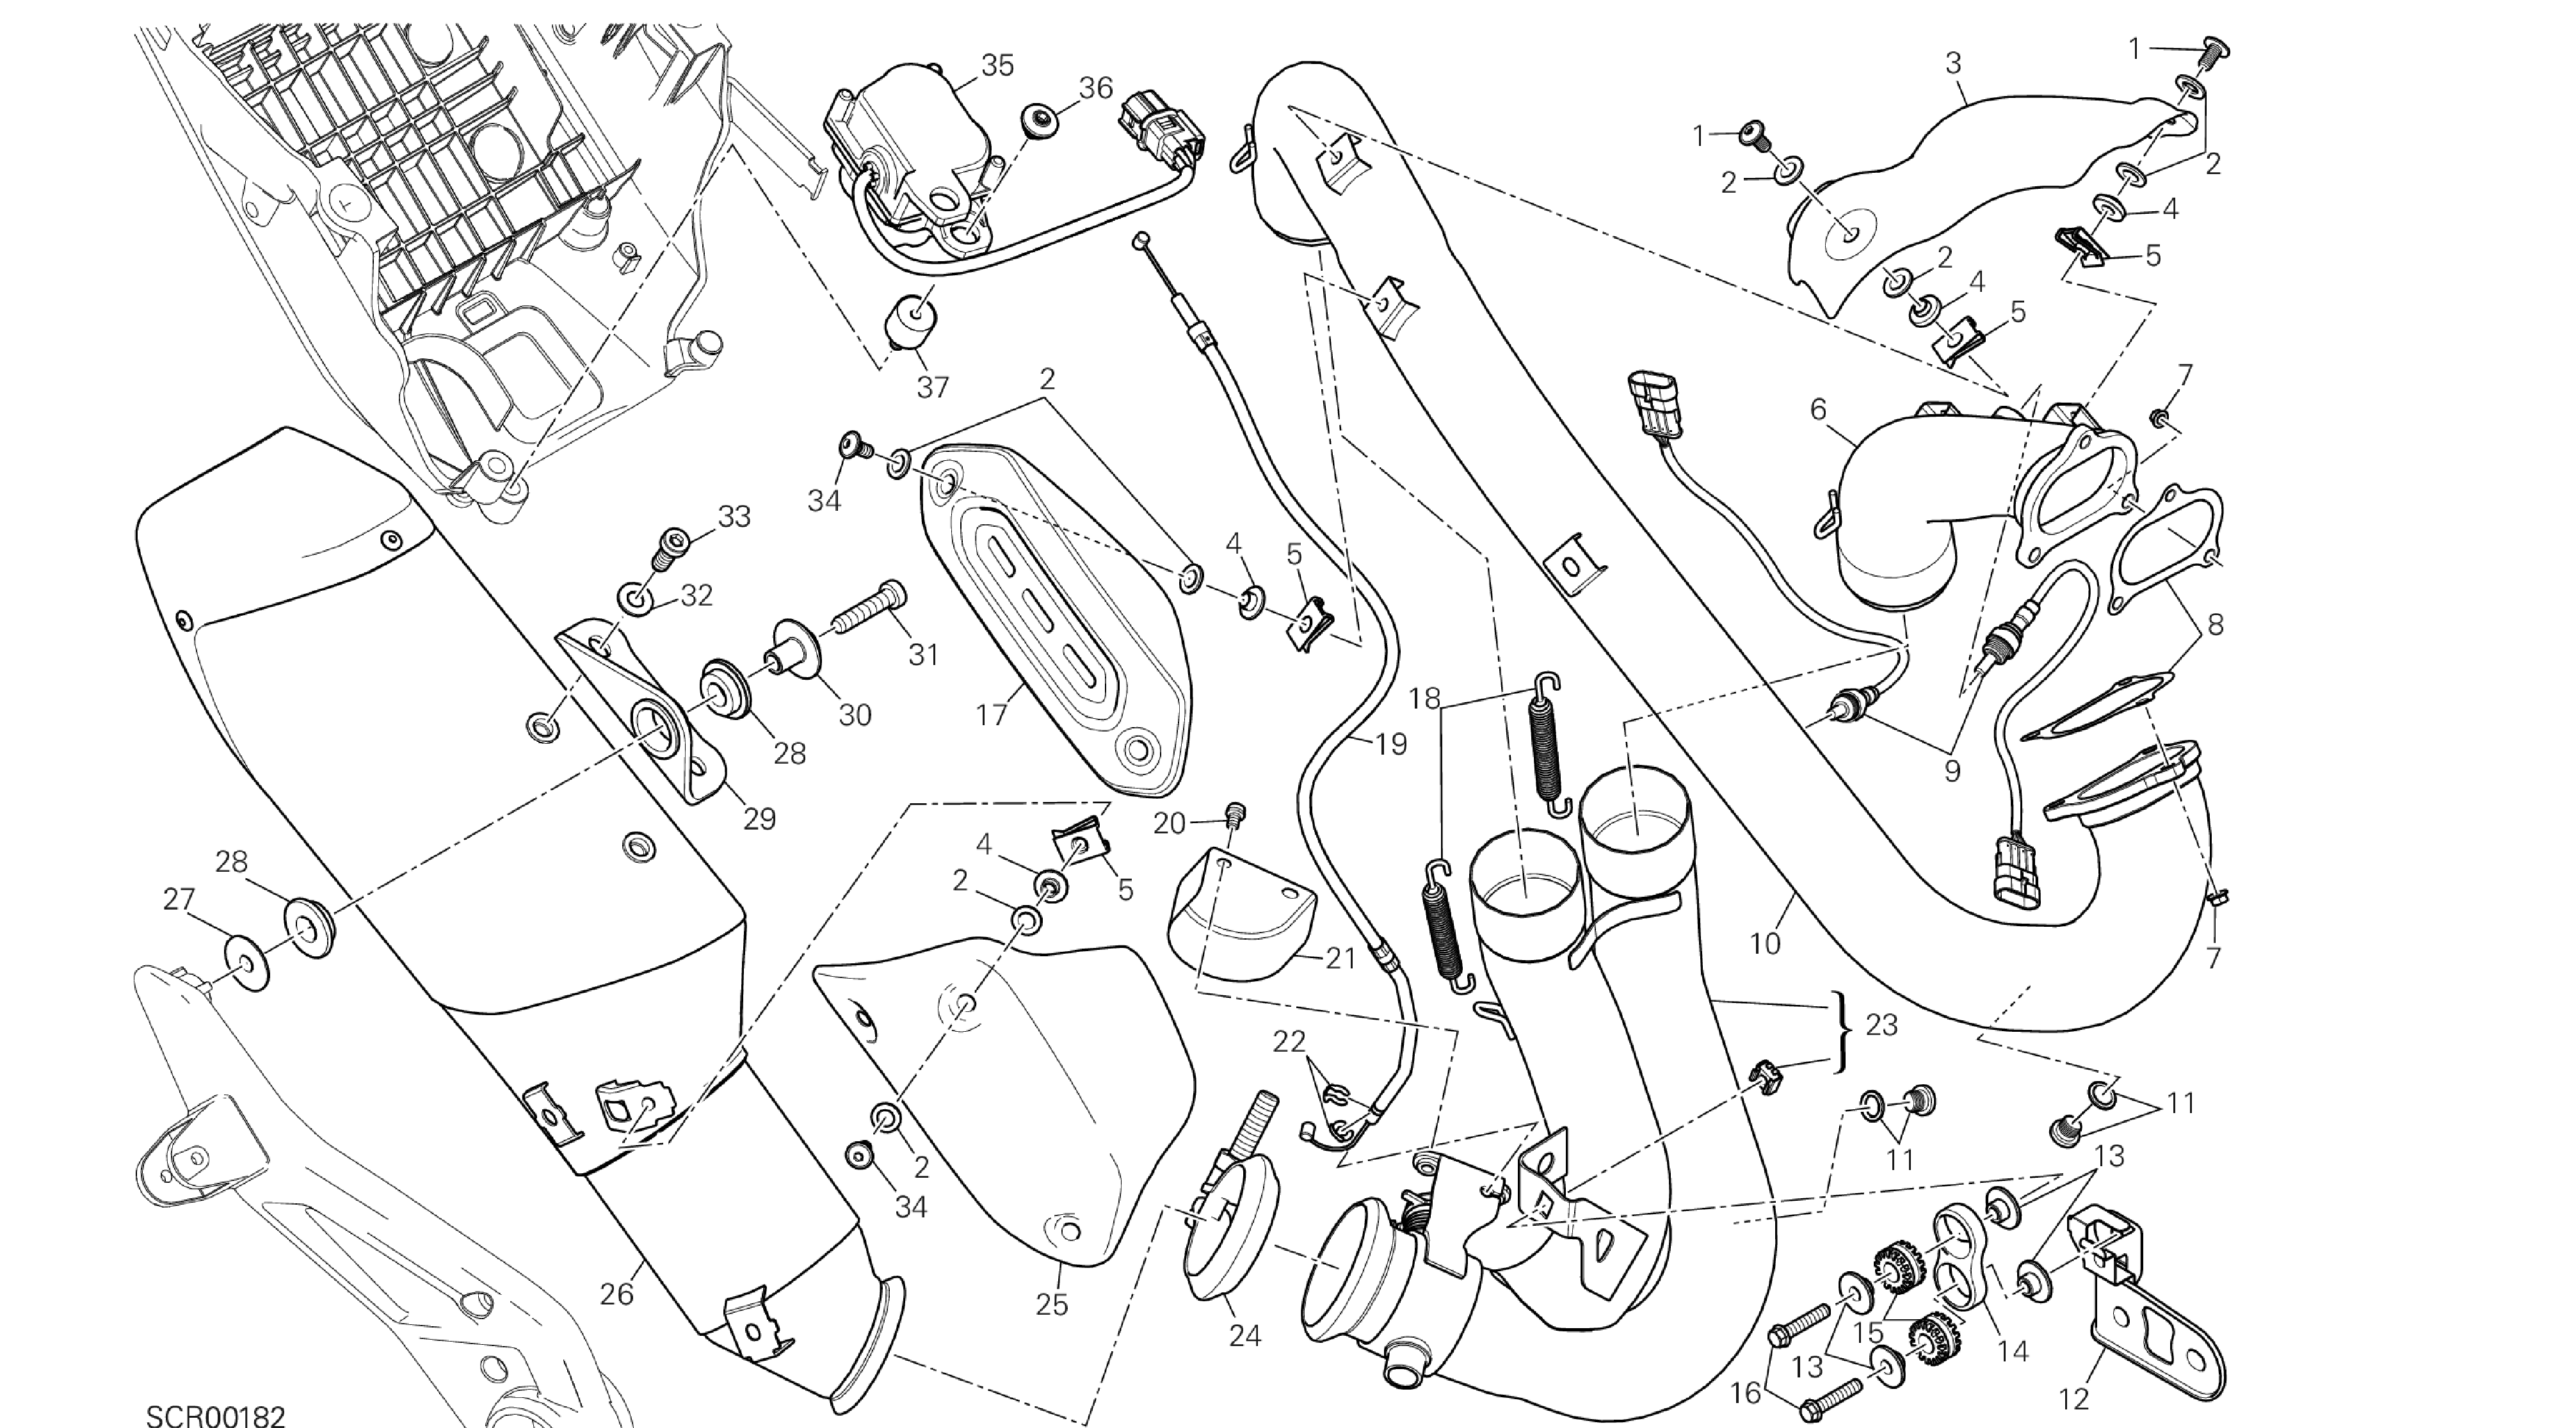 DRAWING 019 - EXHAUST SYSTEM [X ST:CAL,C DN,EUR] GROUP FR AME